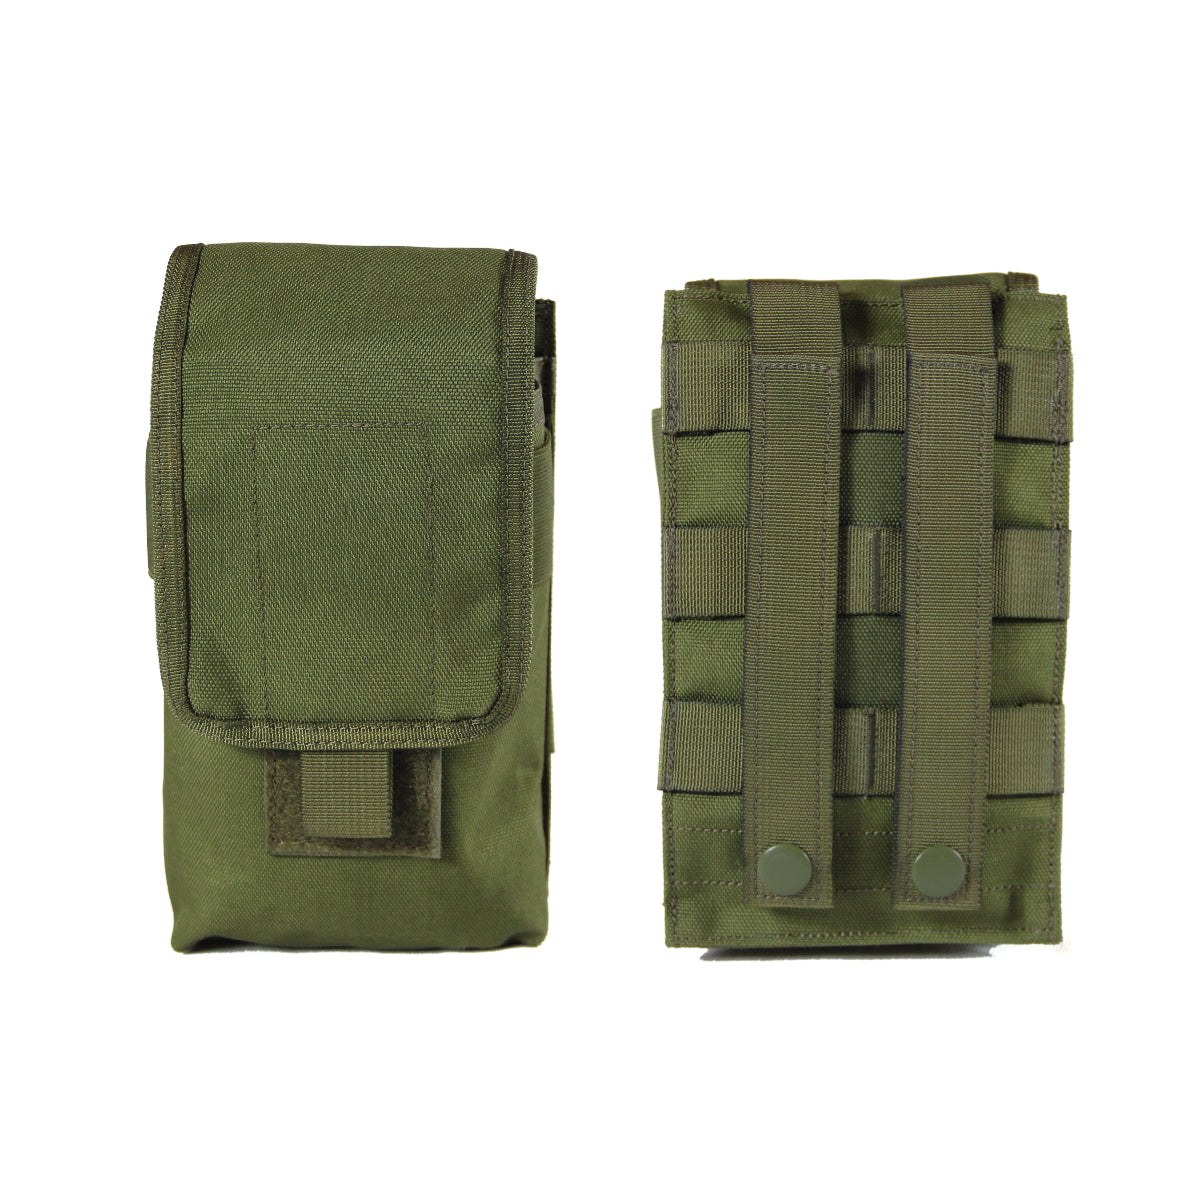 Tactical Molle Pouch Ammo Bag with Pouch Attachment Ladder System